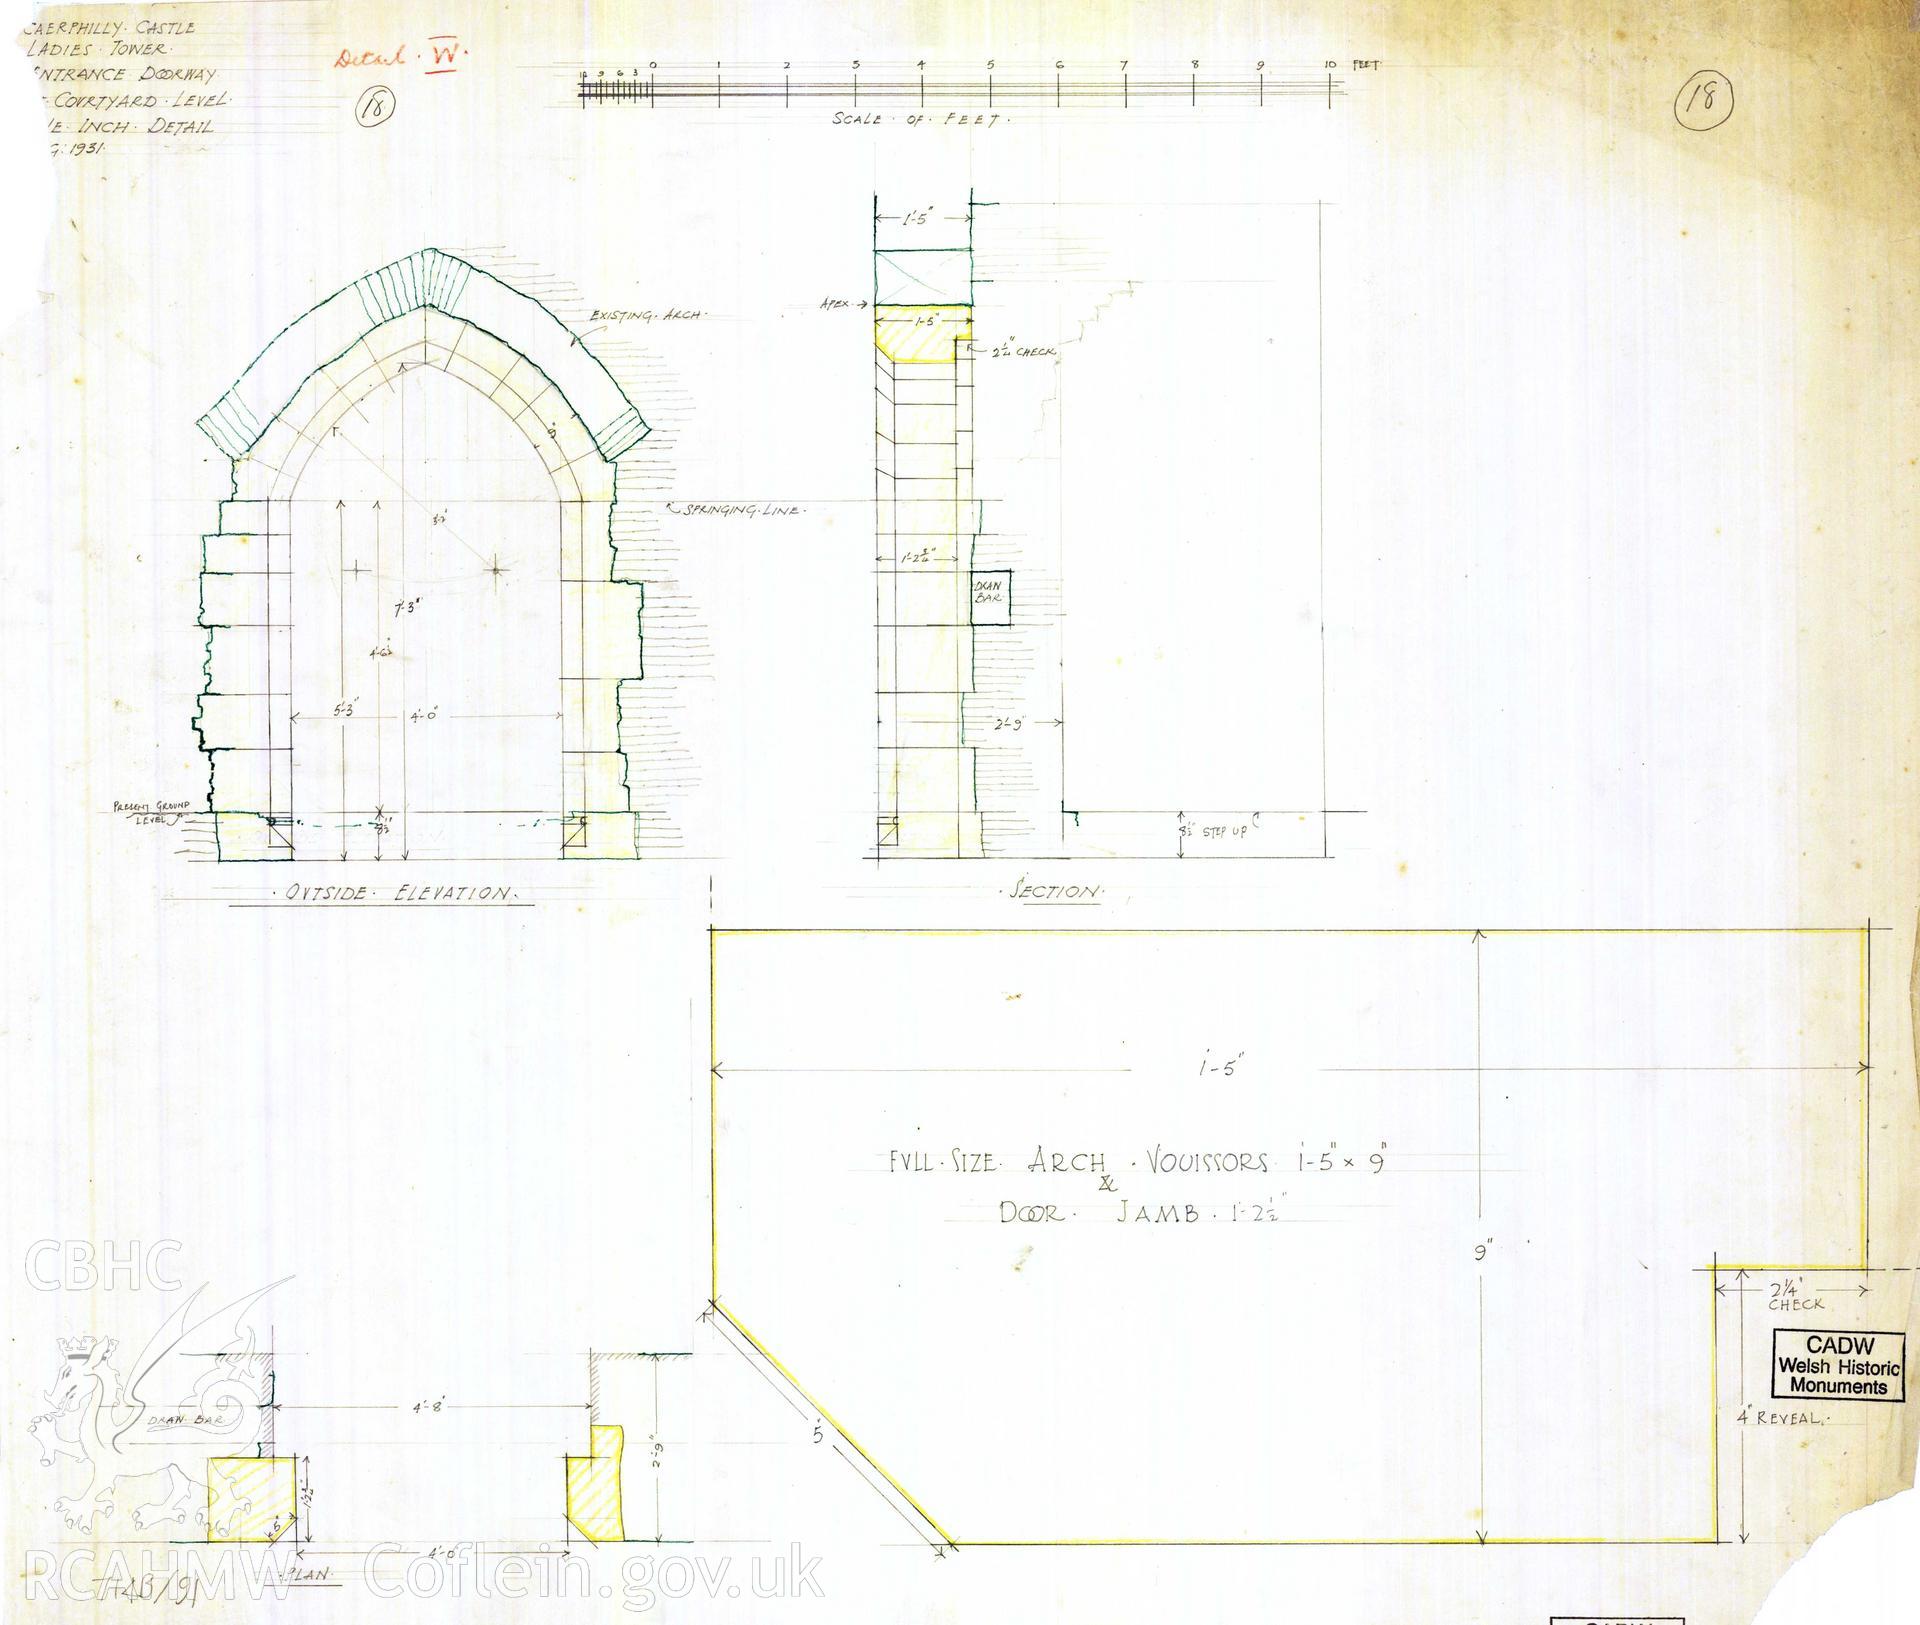 Digital copy of Cadw guardianship monument drawing of Caerphilly Castle. NW tower, gr fl, entrance door. Cadw ref. no: 714B/91. Scale 1:12.1. Original drawing withdrawn and returned to Cadw at their request.